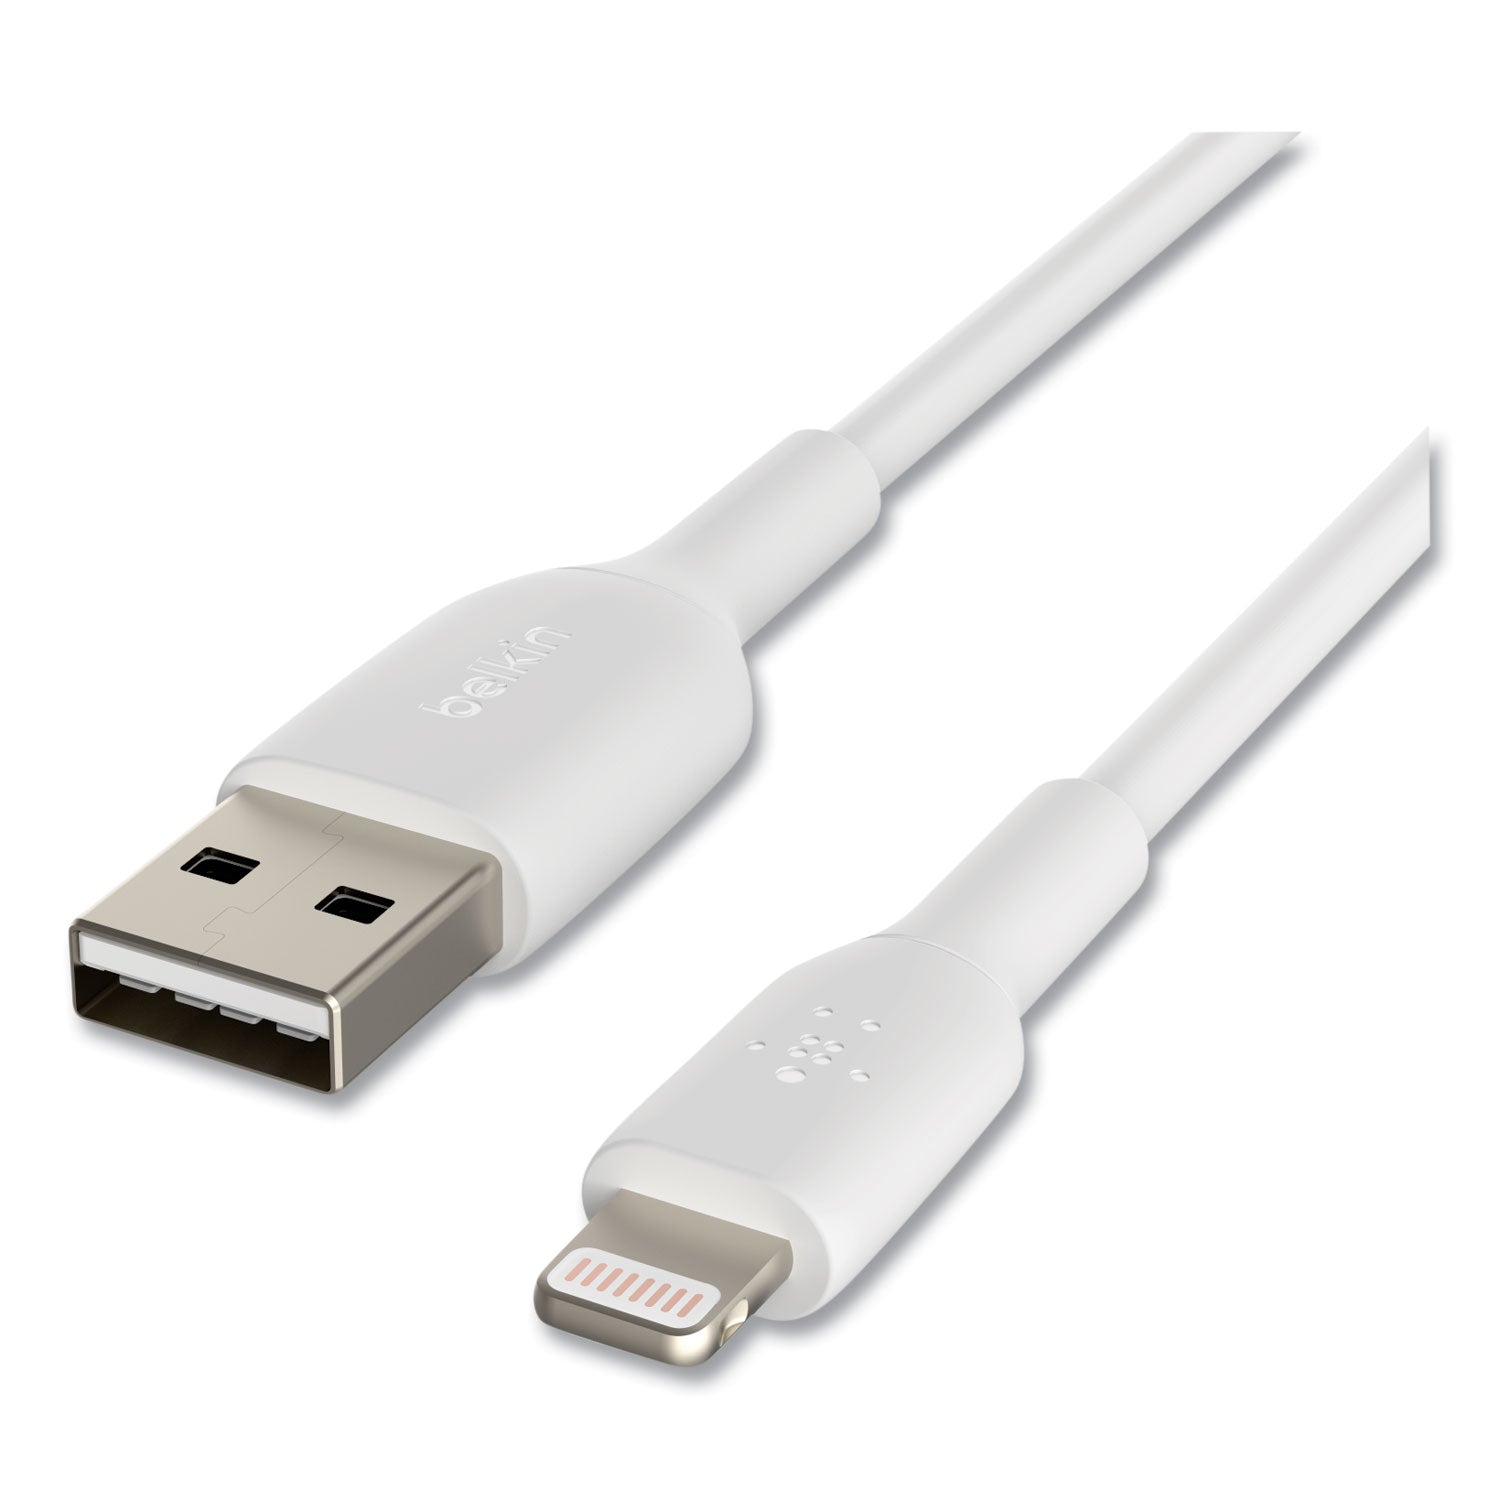 boost-charge-apple-lightning-to-usb-a-chargesync-cable-98-ft-white_blkcaa001bt3mwh - 6